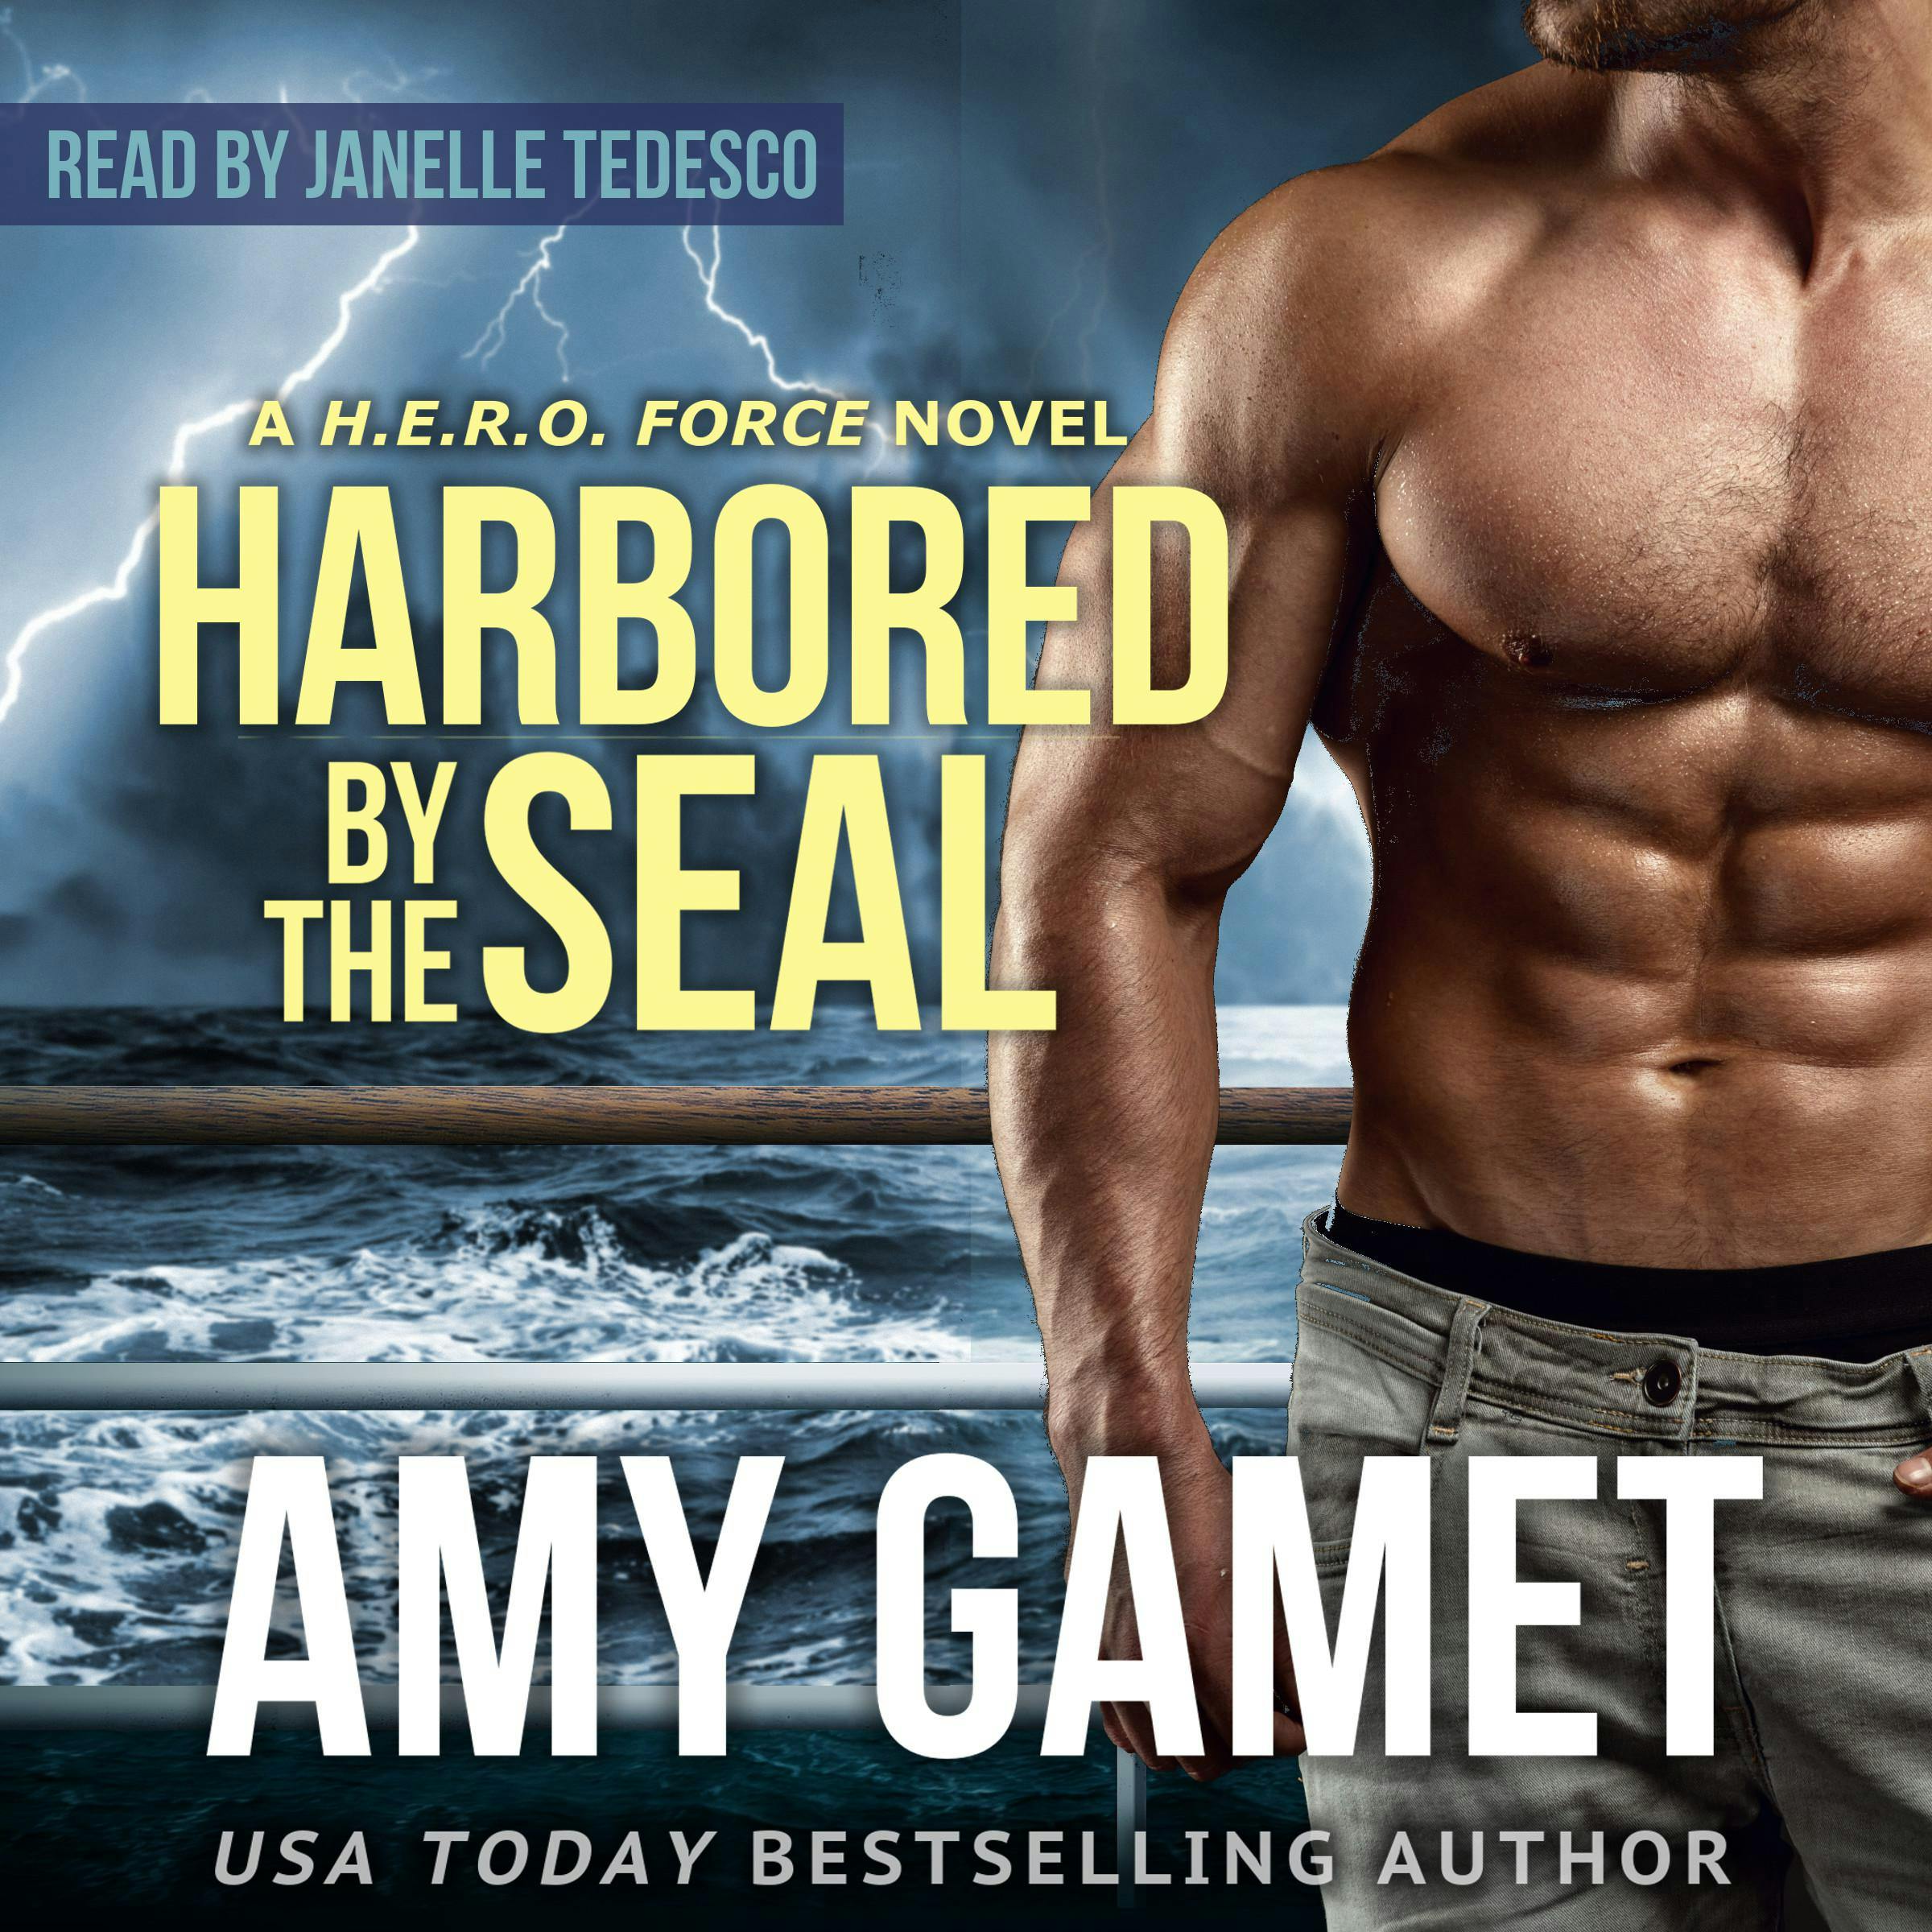 Harbored by the SEAL - Amy Gamet